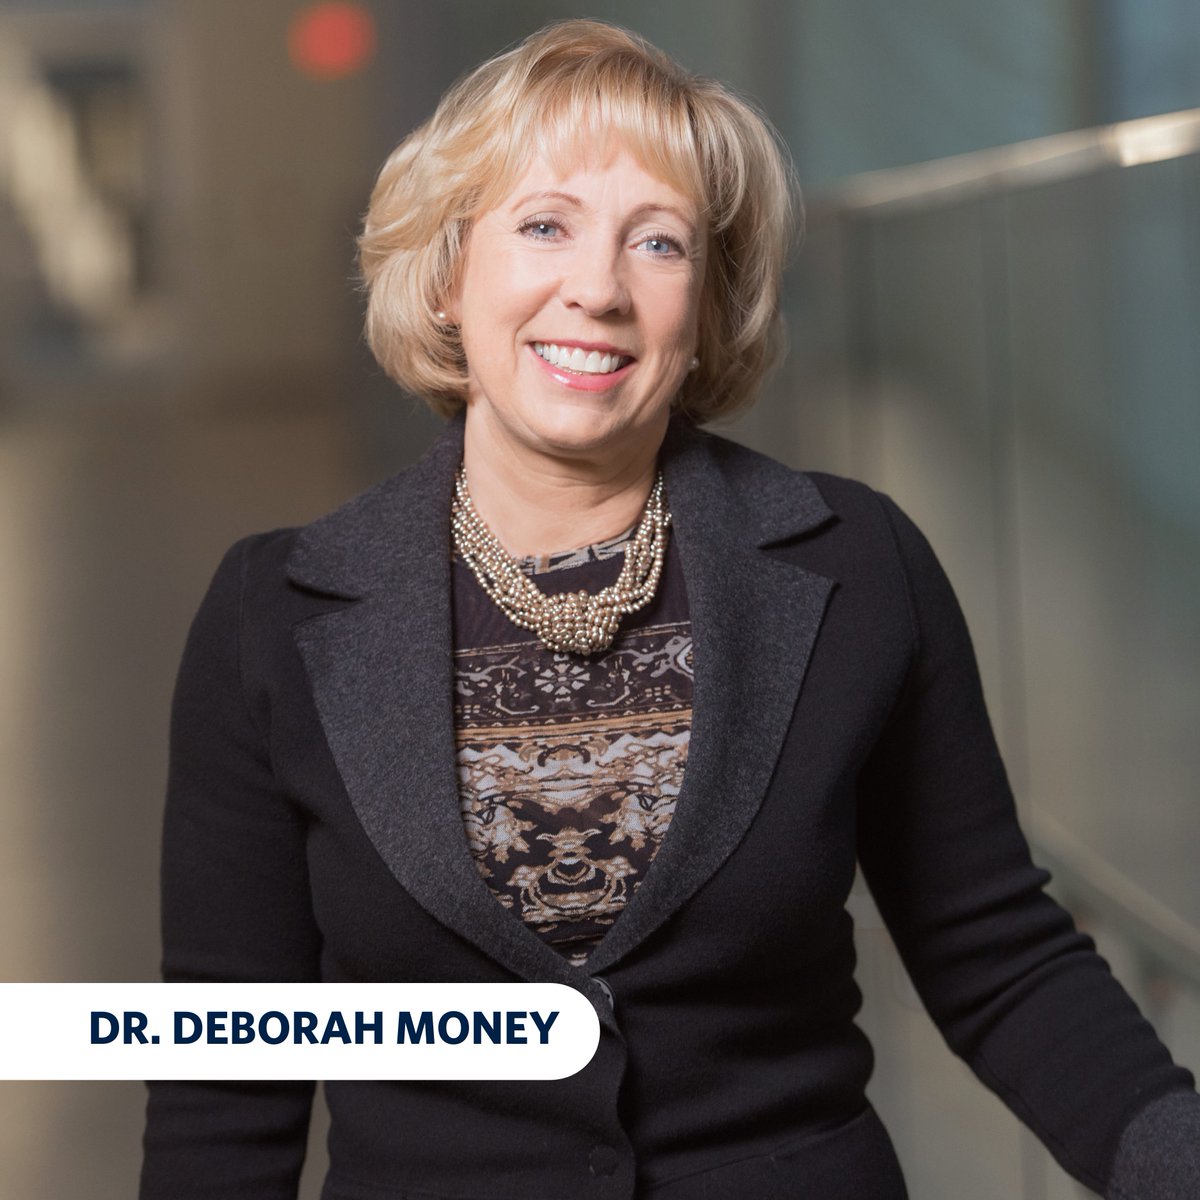 ⭐️Dr. Deborah Money led national research programs that informed health guidelines and vaccine recommendations for pregnant people and their infants. (4/4)